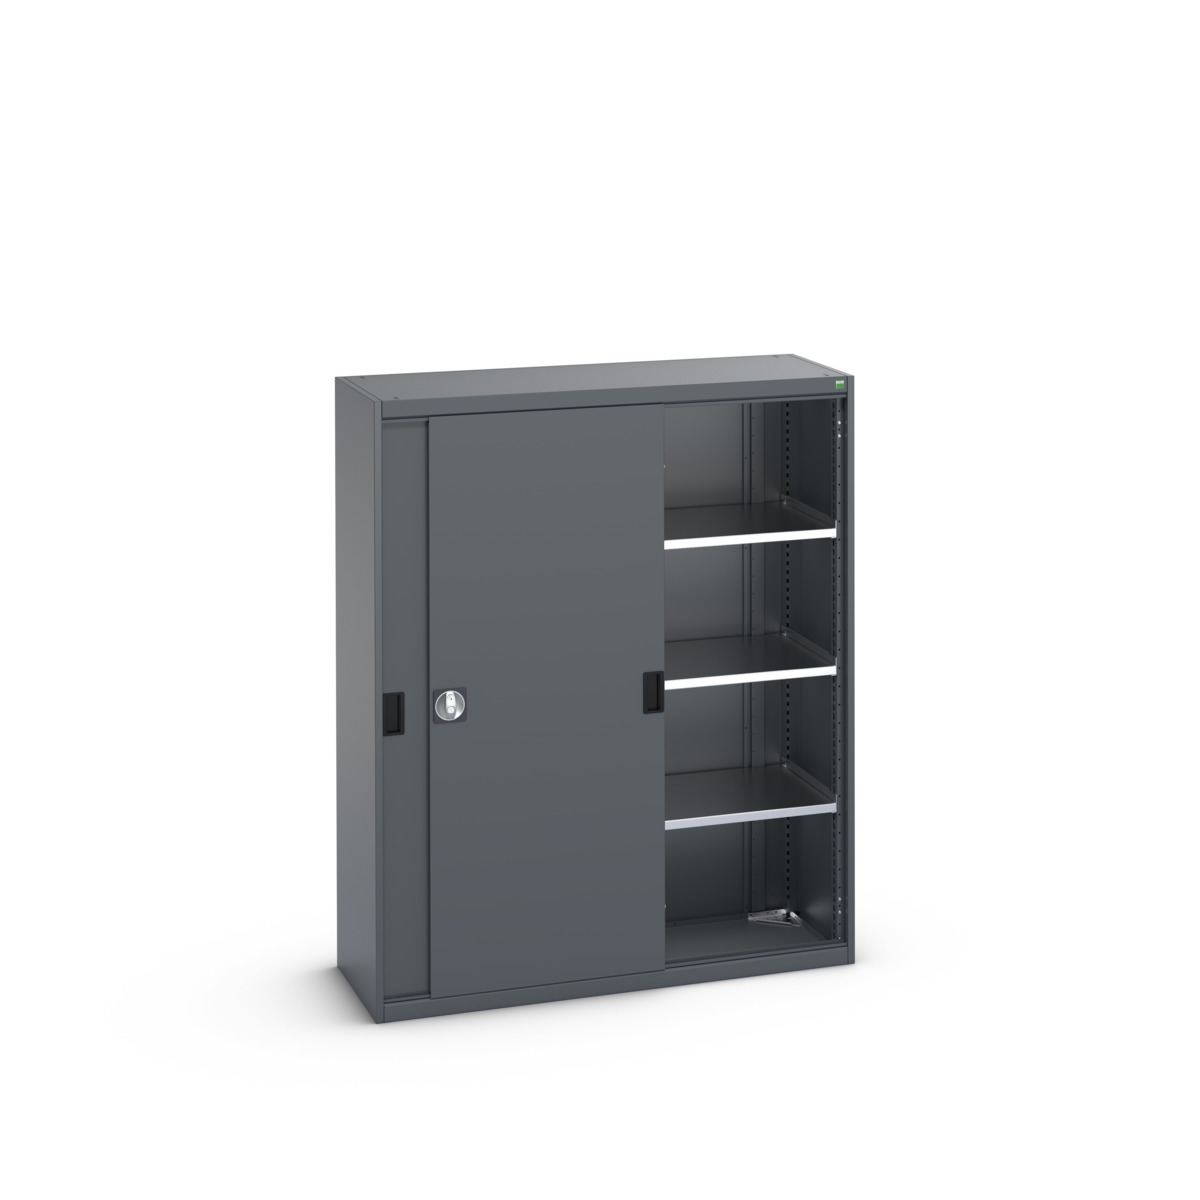 40014064.77V - Armoire Cubio SMS-13516-1